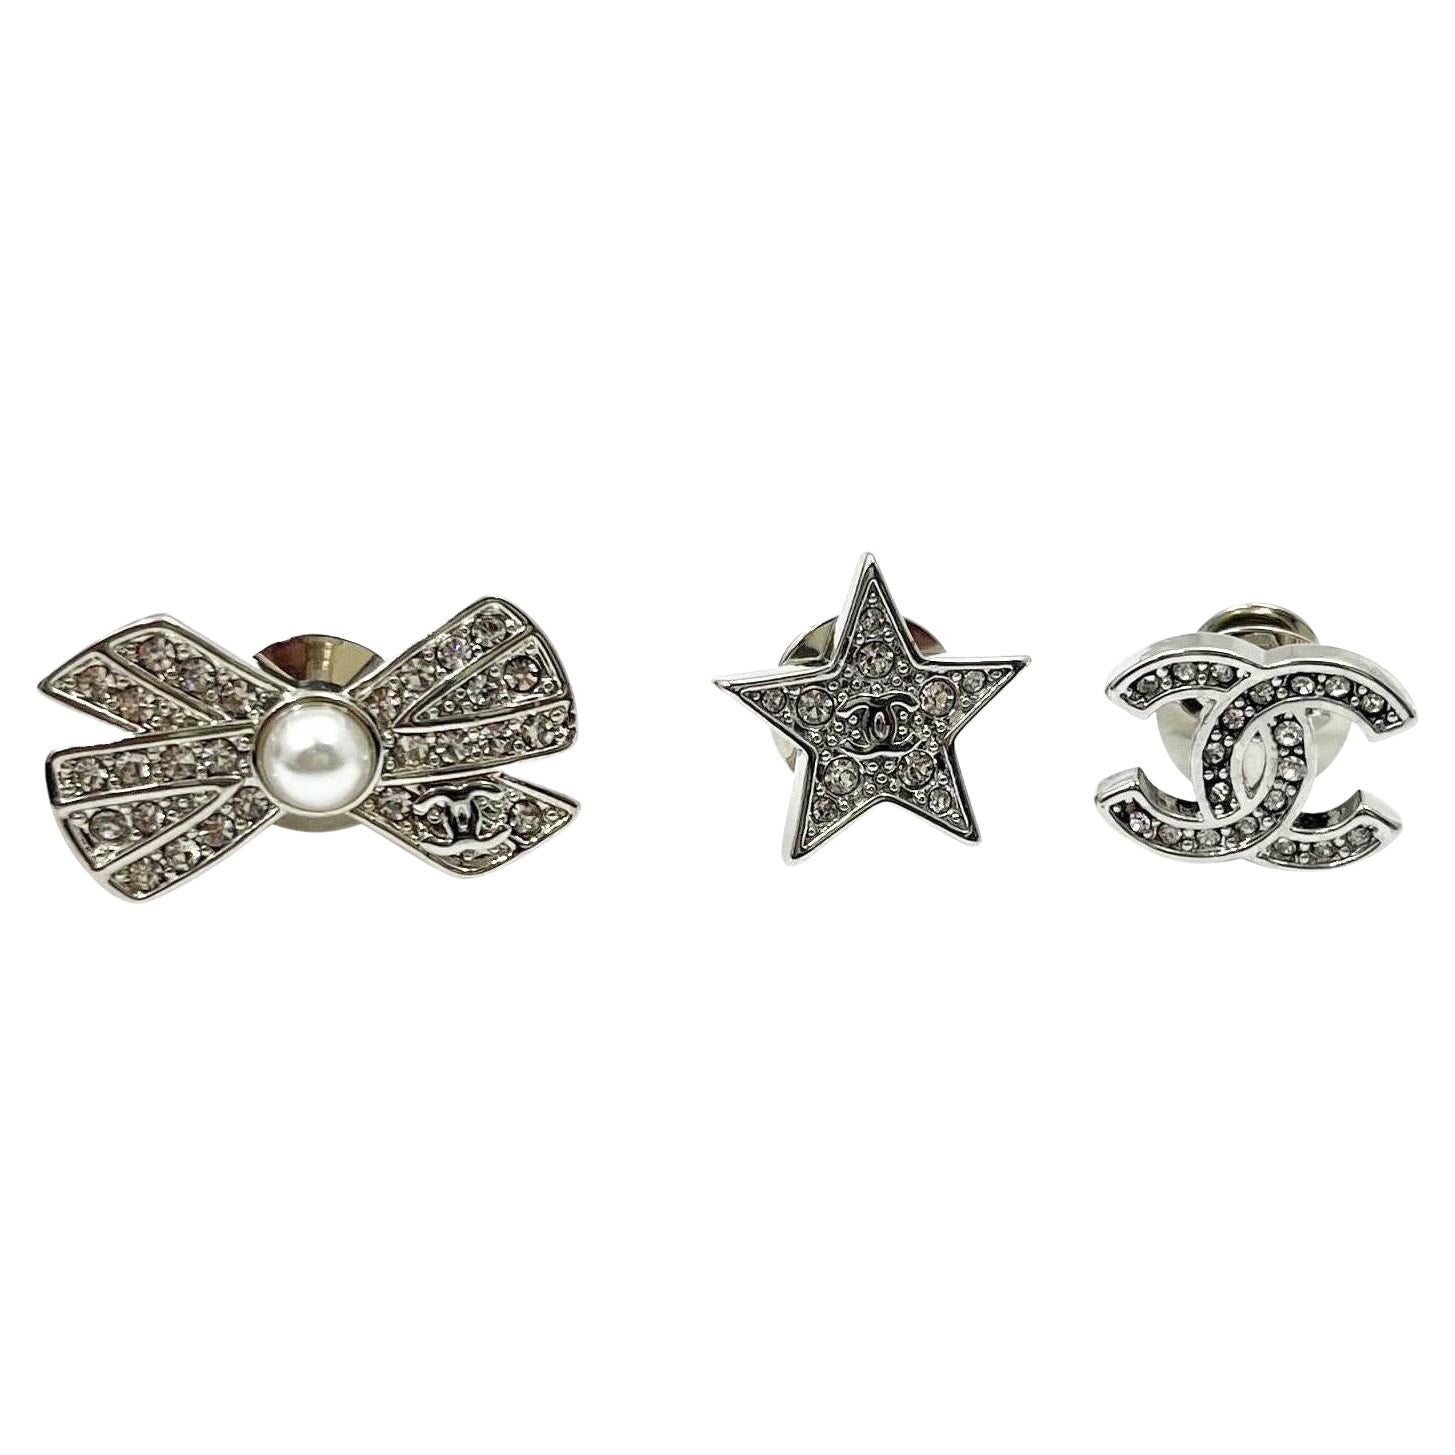 Chanel Brand New Silver CC Star Bow Crystal 3 Pins Brooch For Sale